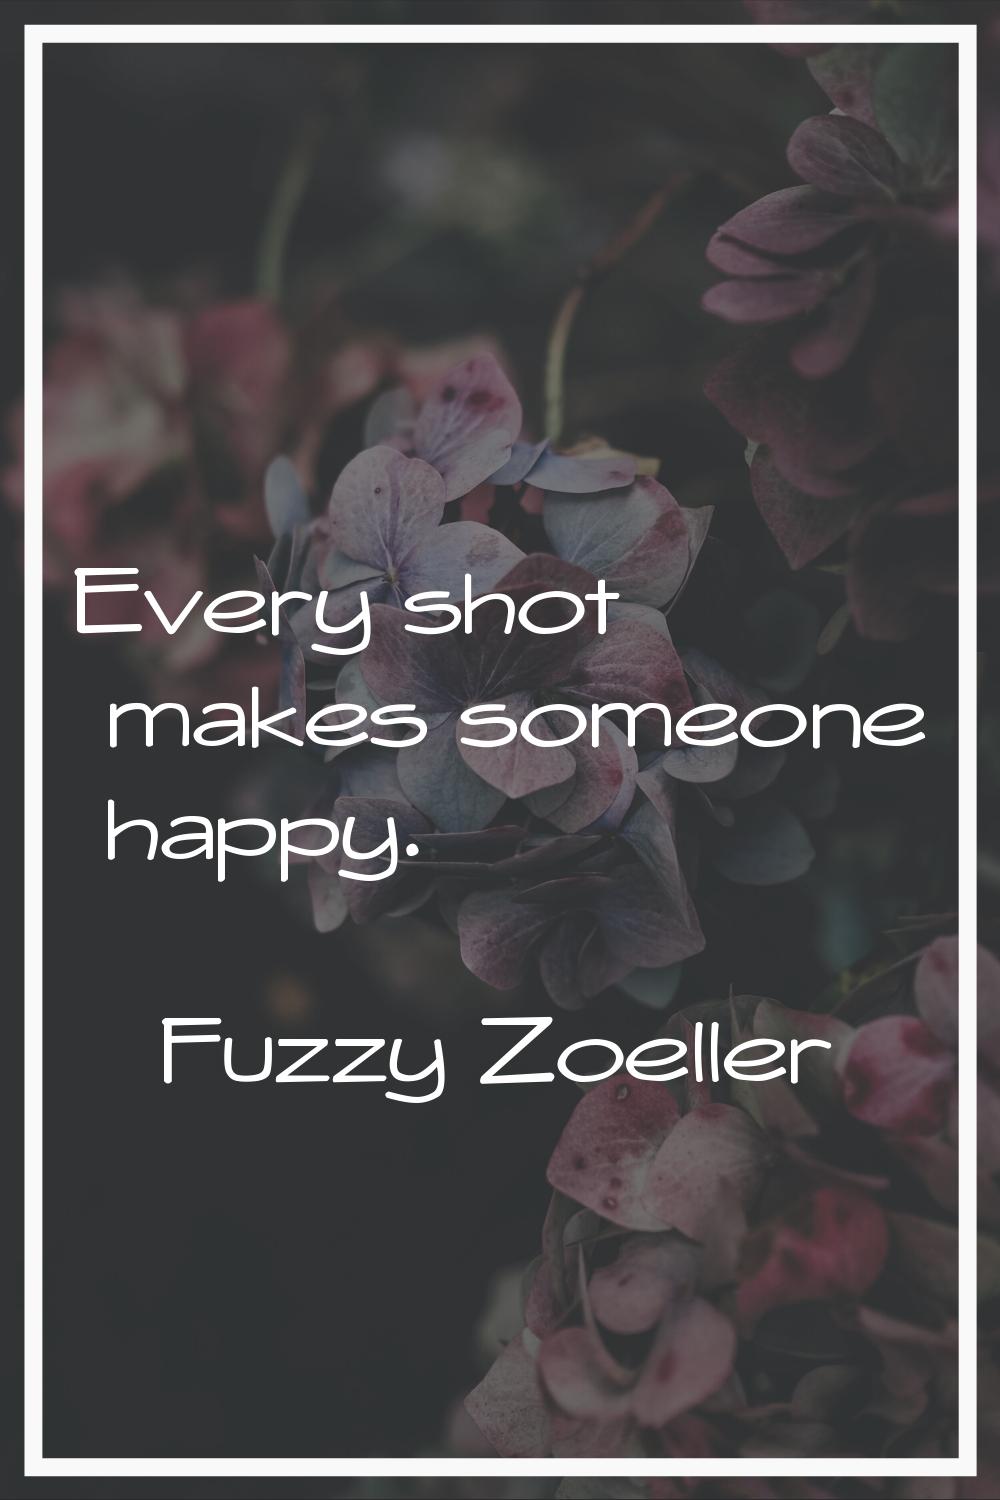 Every shot makes someone happy.